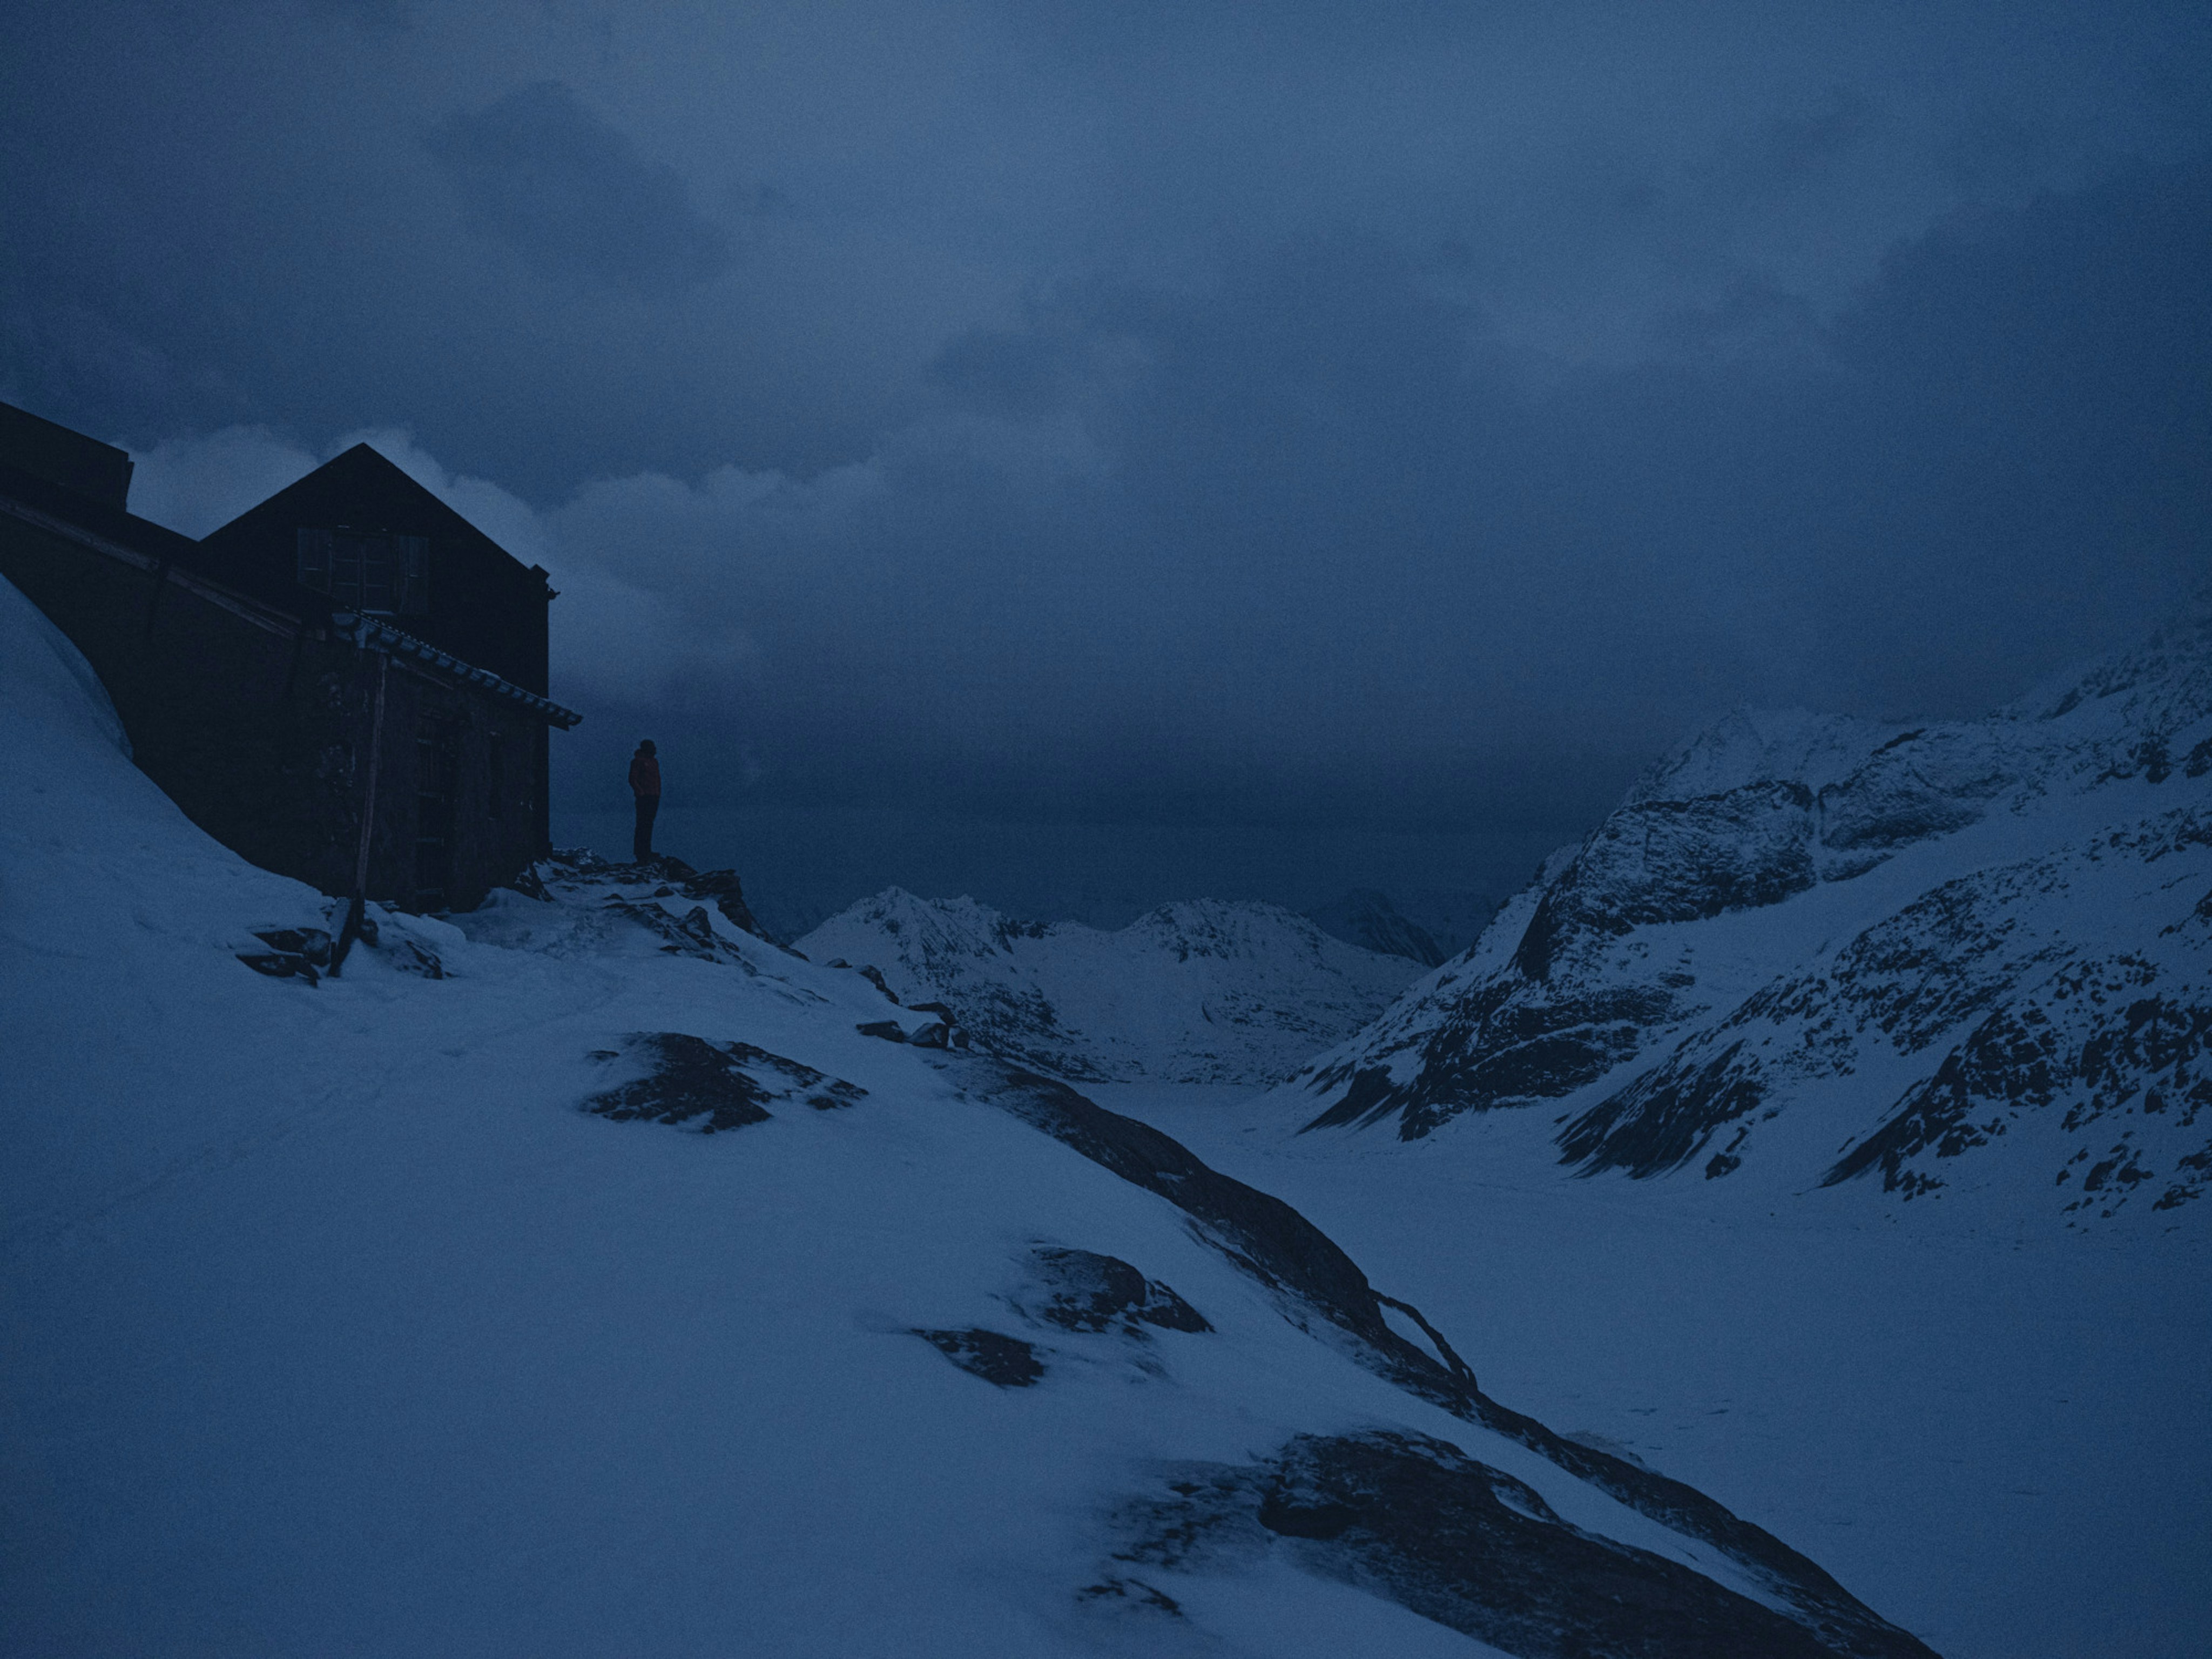 House on the Aletsch Glacier for Together for glaciers.